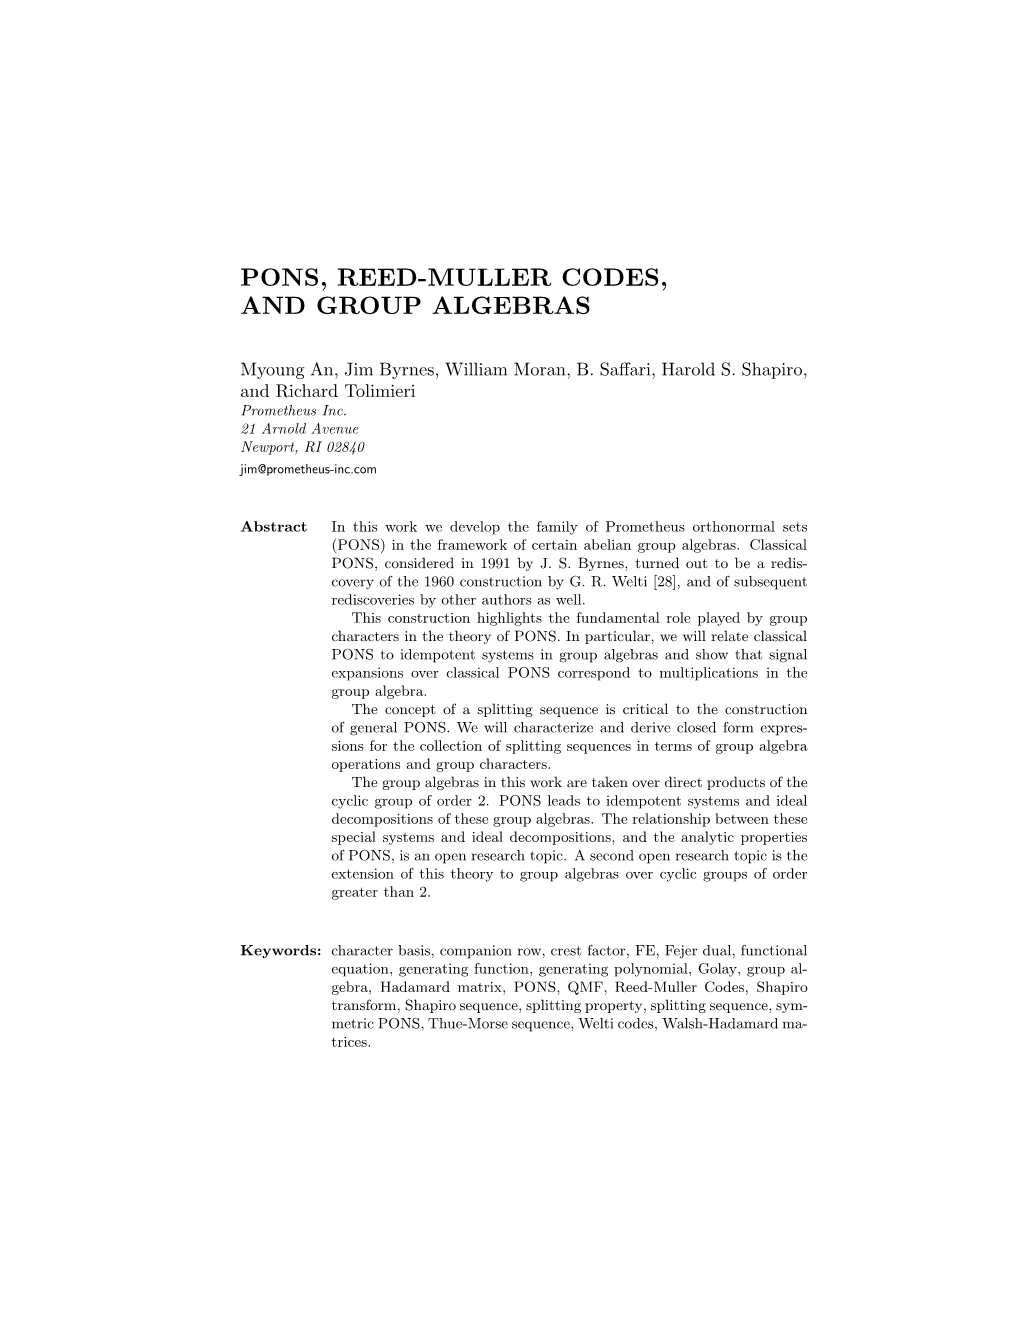 Pons, Reed-Muller Codes, and Group Algebras